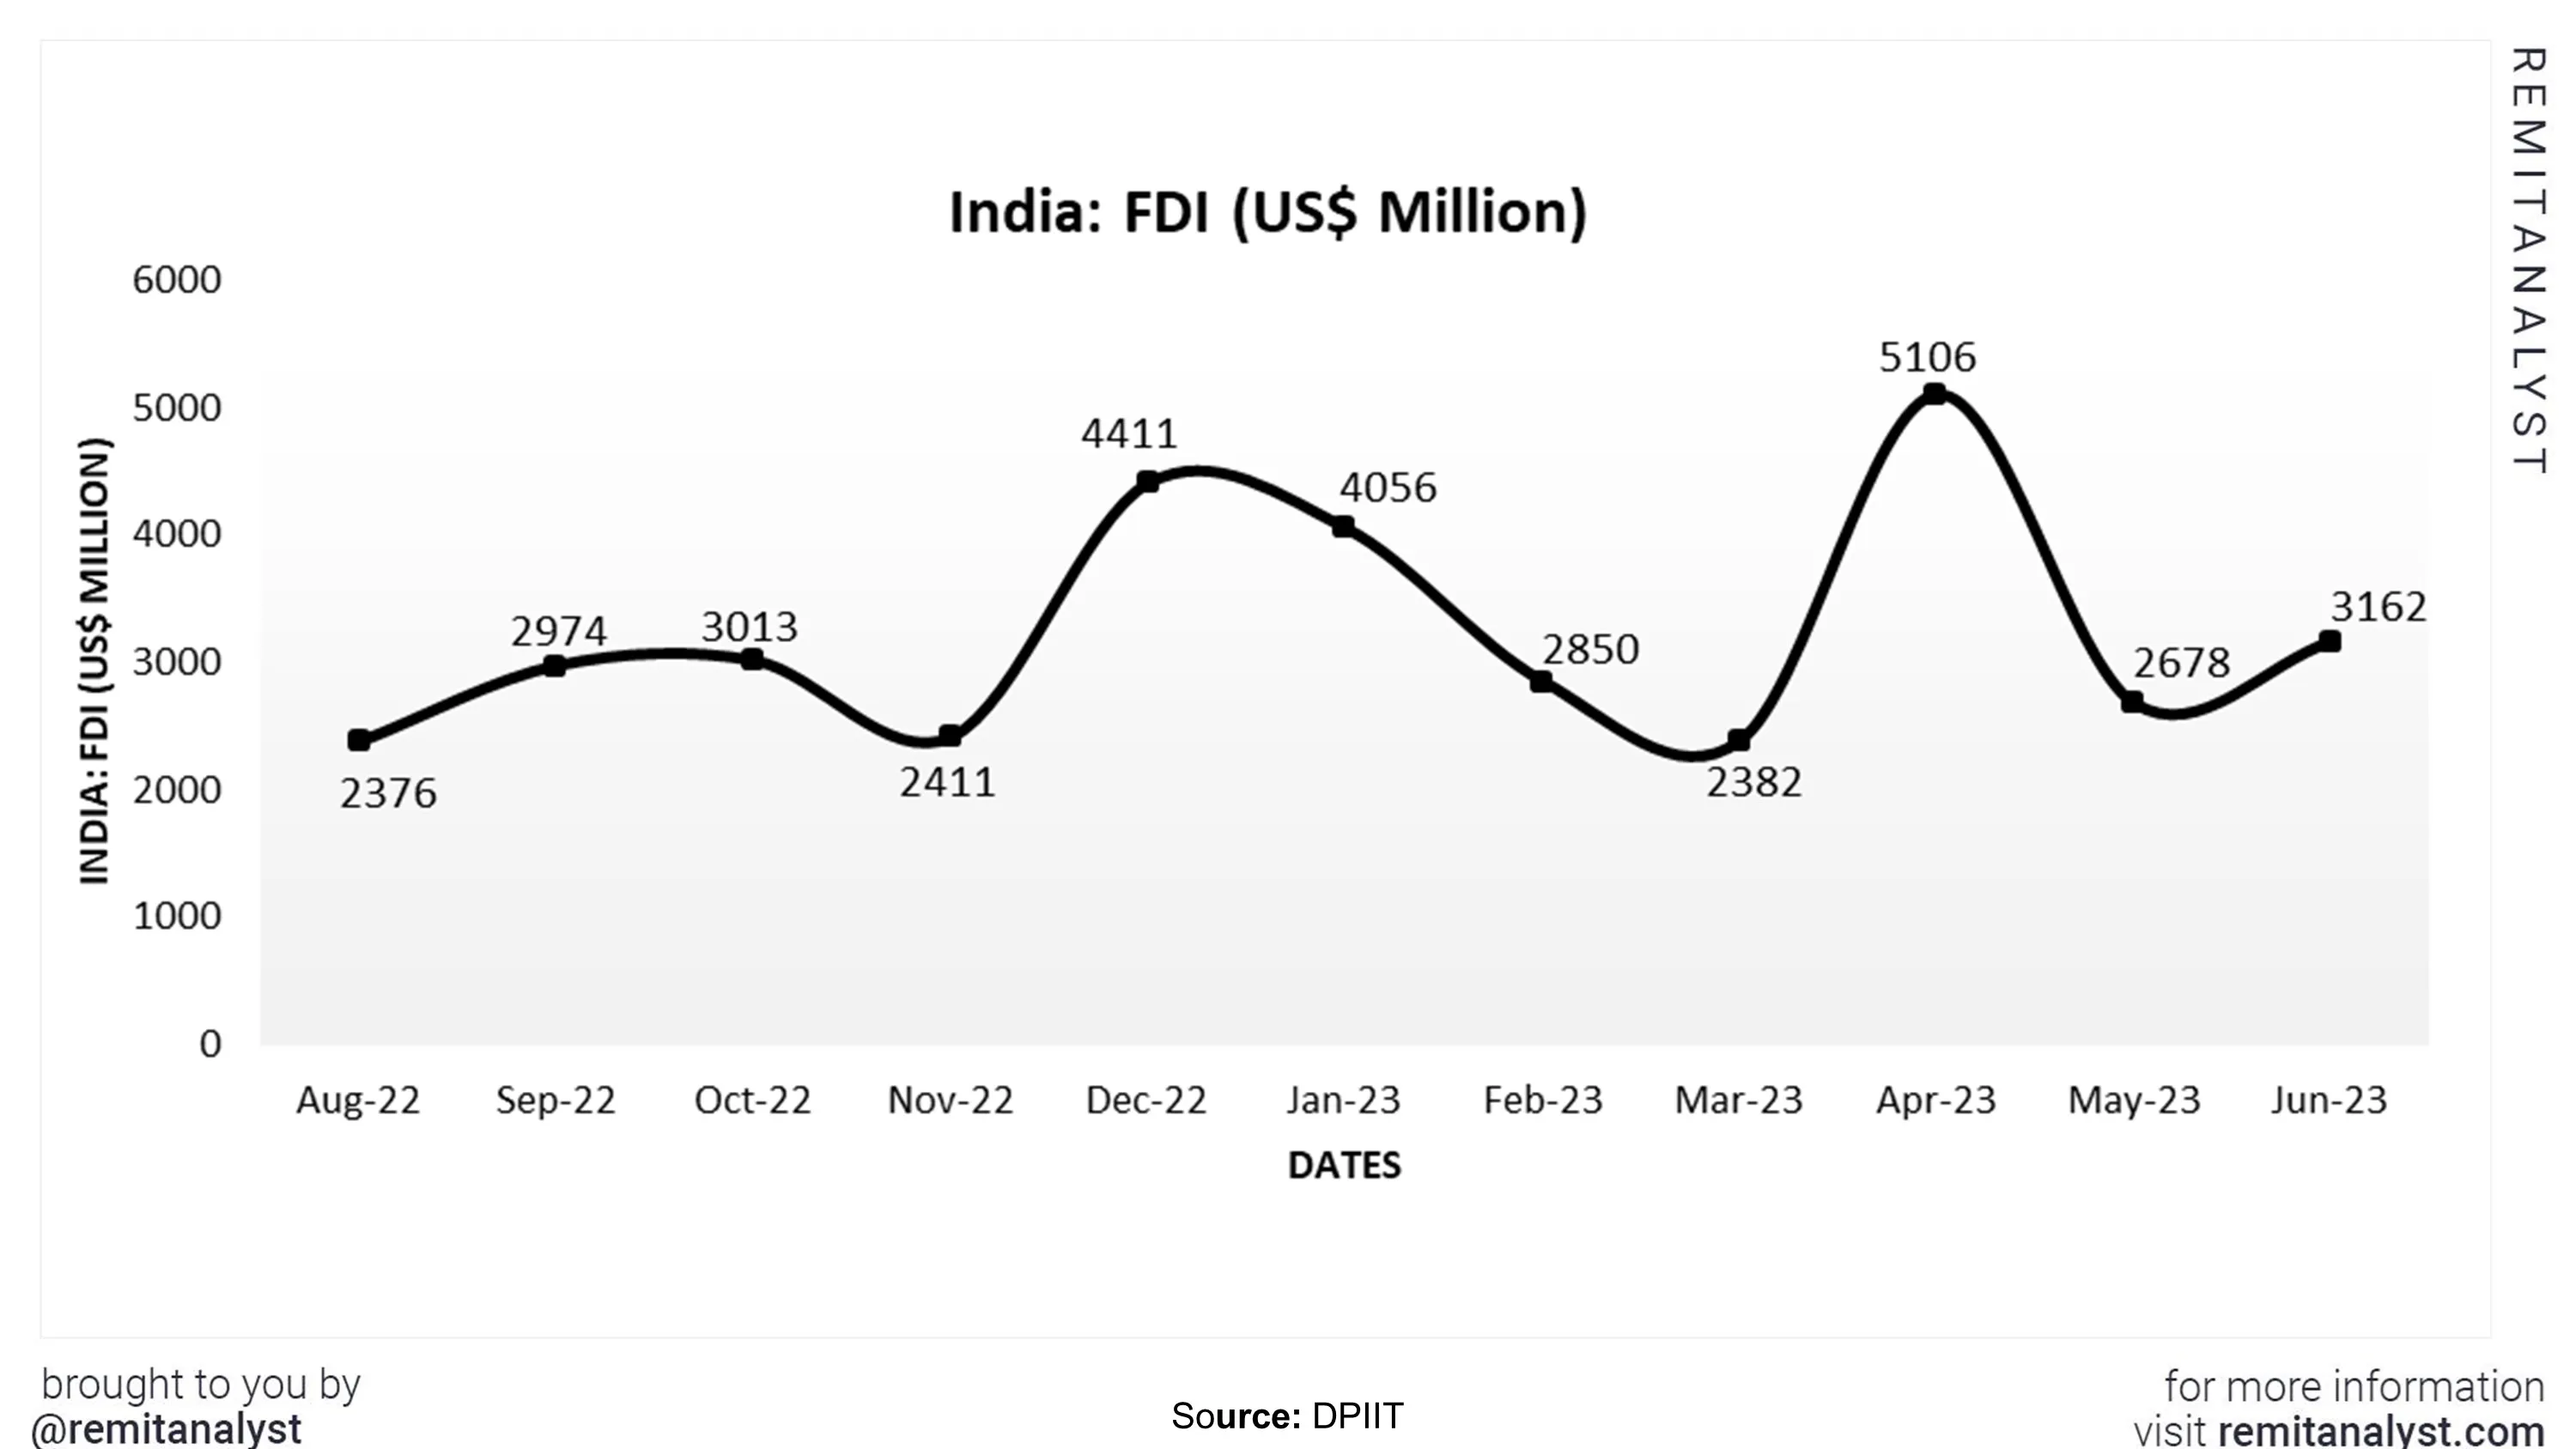 fdi-in-india-from-aug-2022-to-jun-2023